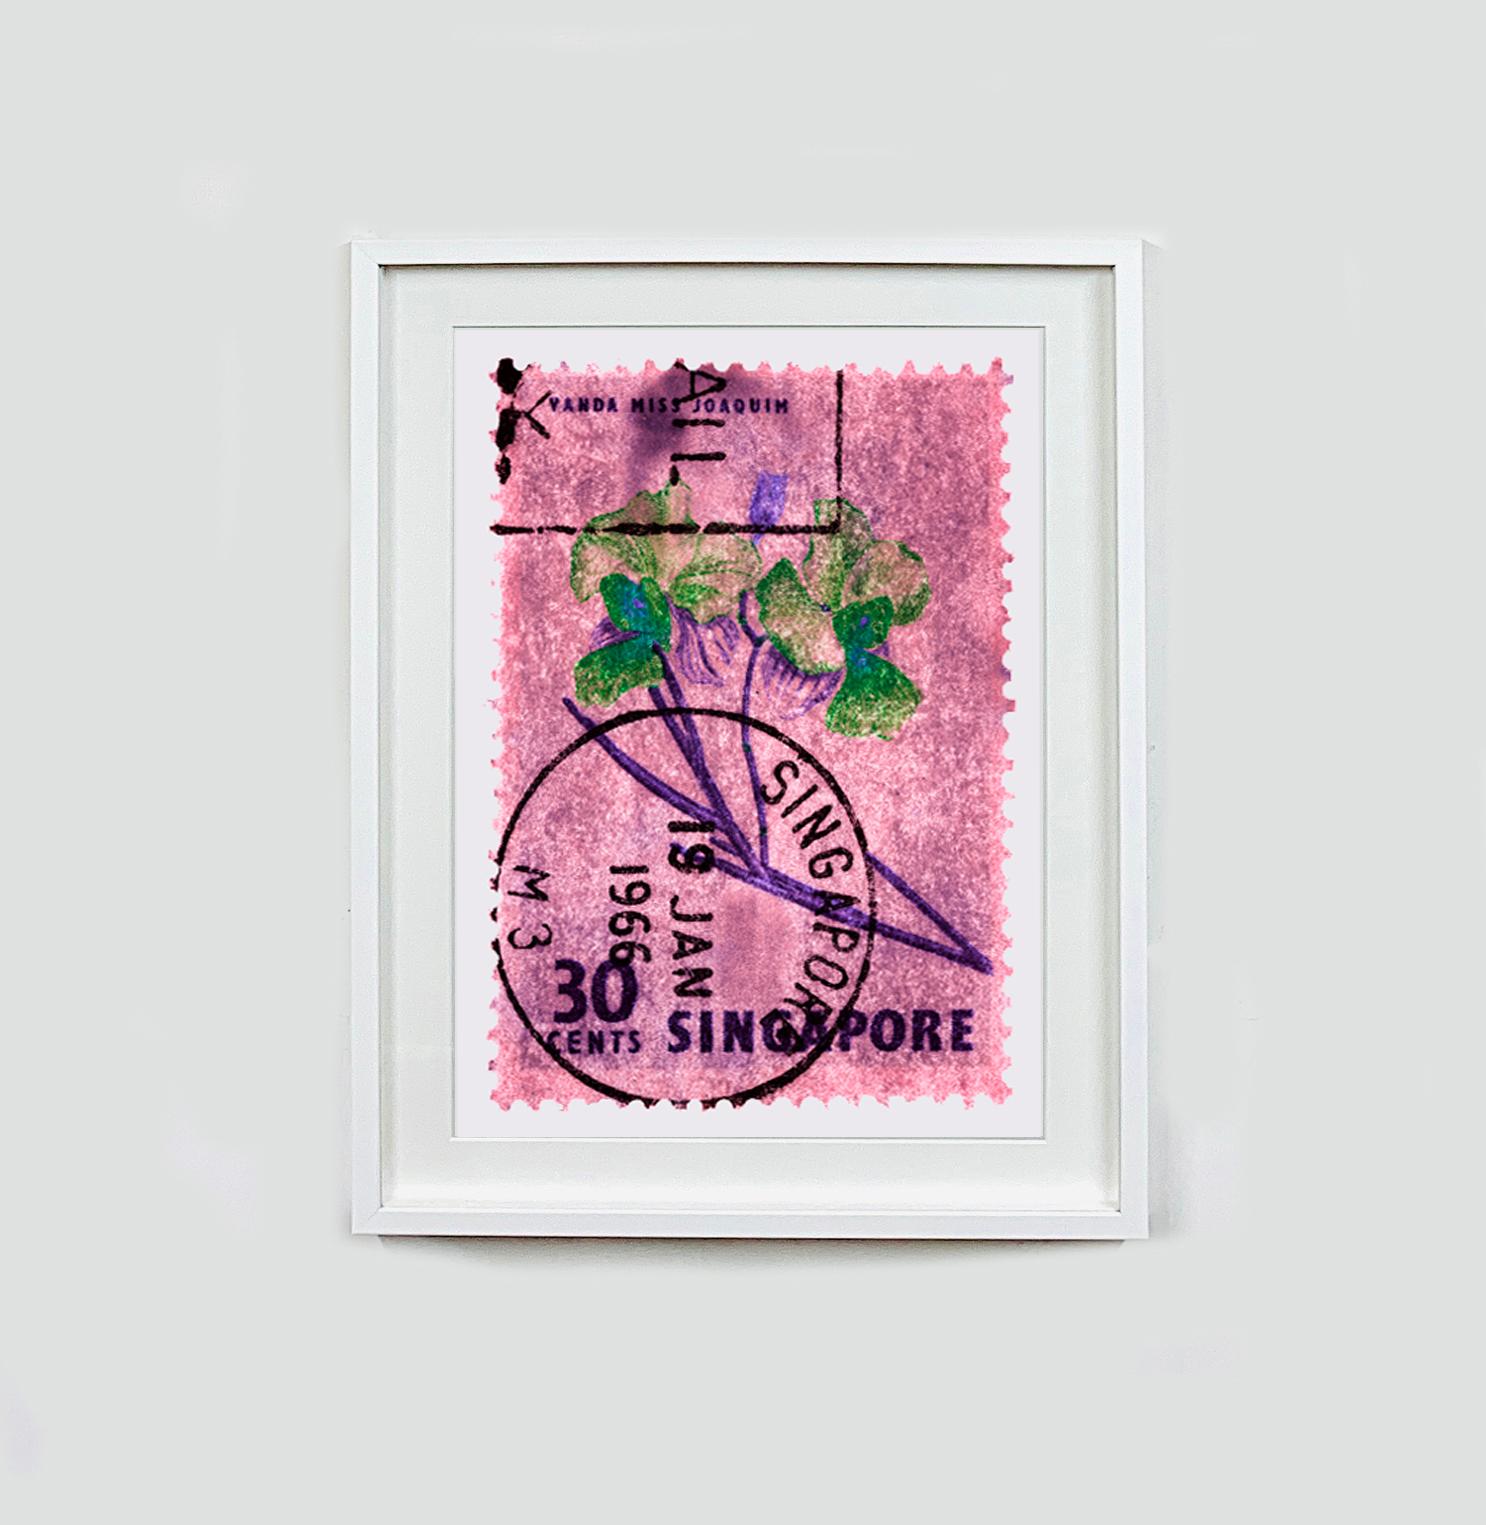 Singapore Stamp Collection, 30c Singapore Orchid Pink - Floral color photo - Print by Heidler & Heeps